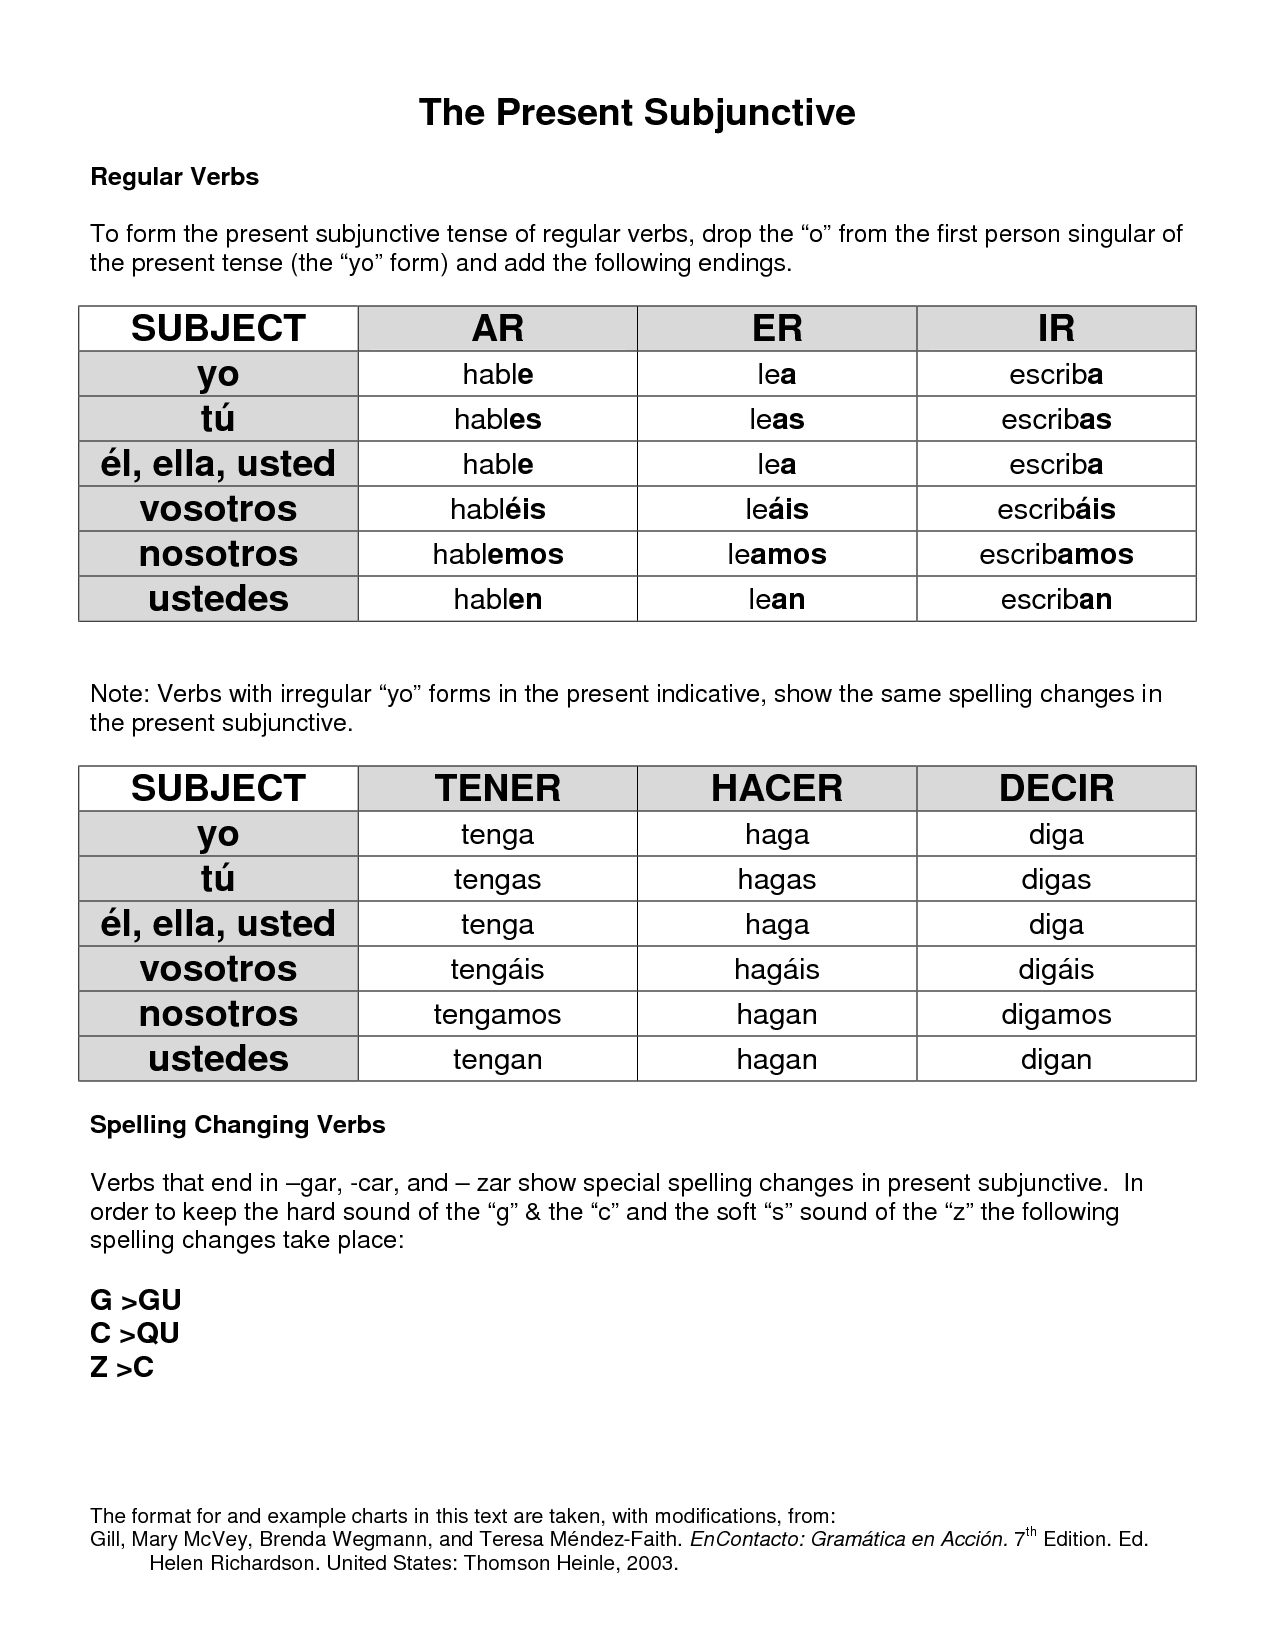 19-best-images-of-reflexive-verbs-in-spanish-worksheet-spanish-reflexive-verbs-worksheet